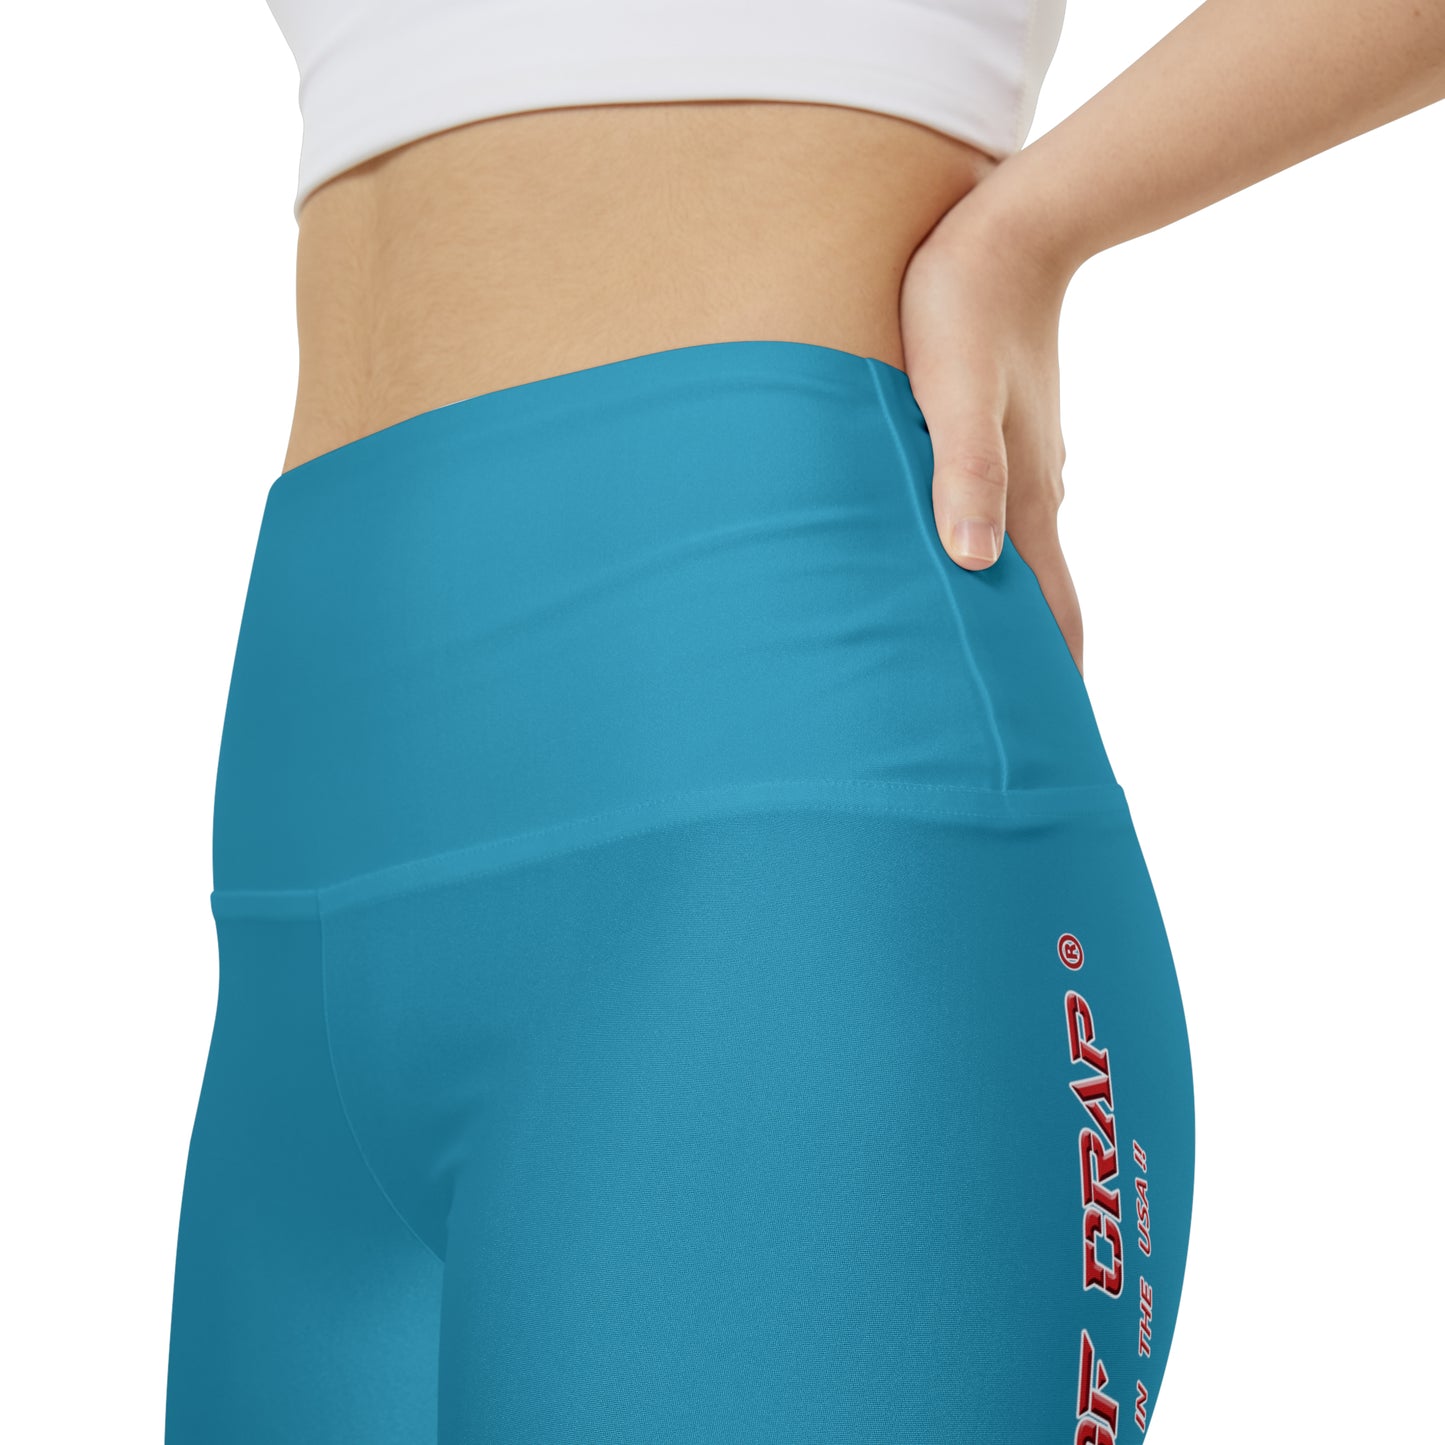 A Piece Of Crap WorkoutWit Shorts - Turquoise